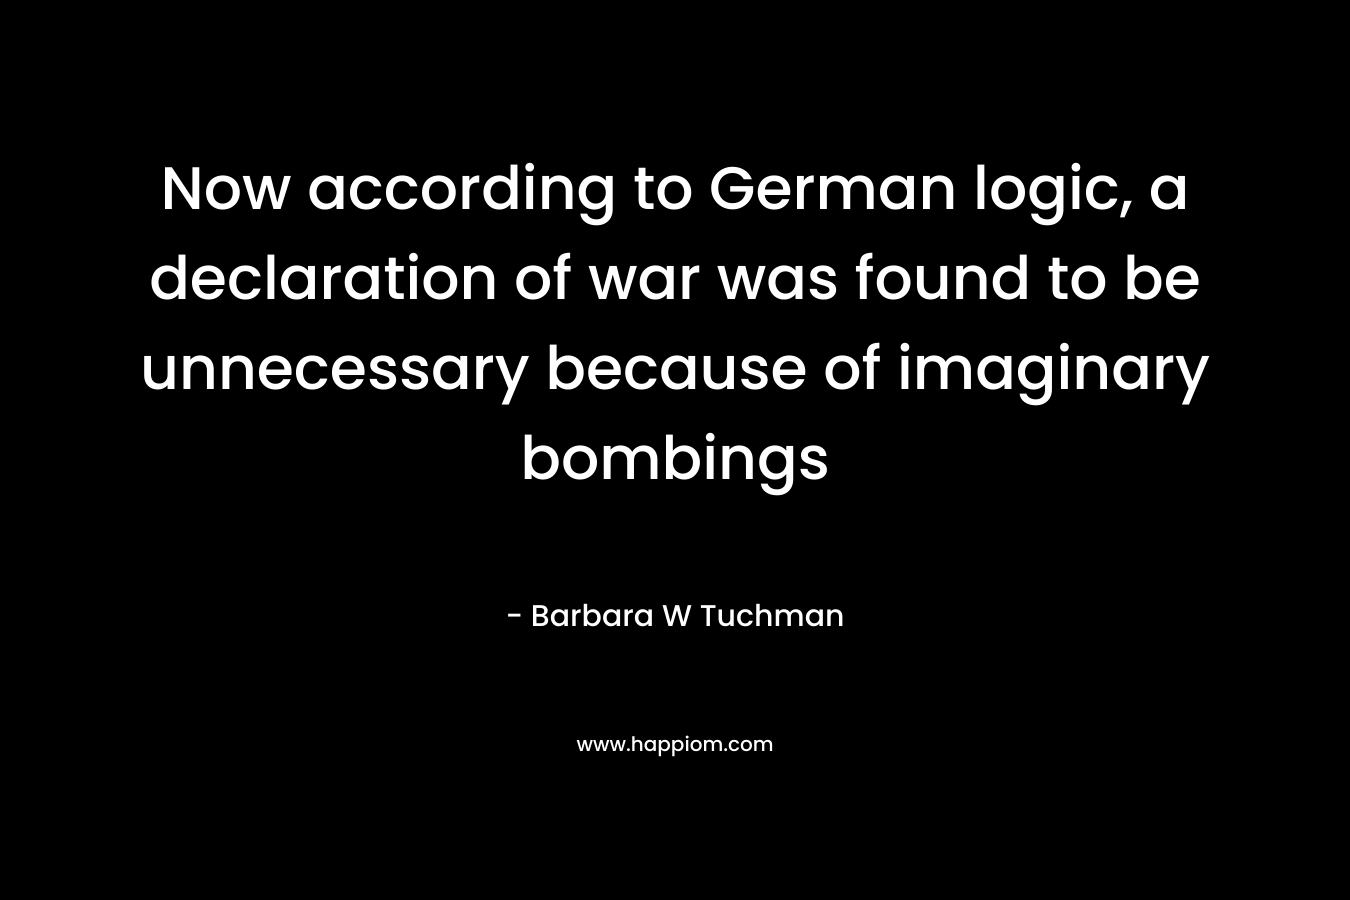 Now according to German logic, a declaration of war was found to be unnecessary because of imaginary bombings – Barbara W Tuchman